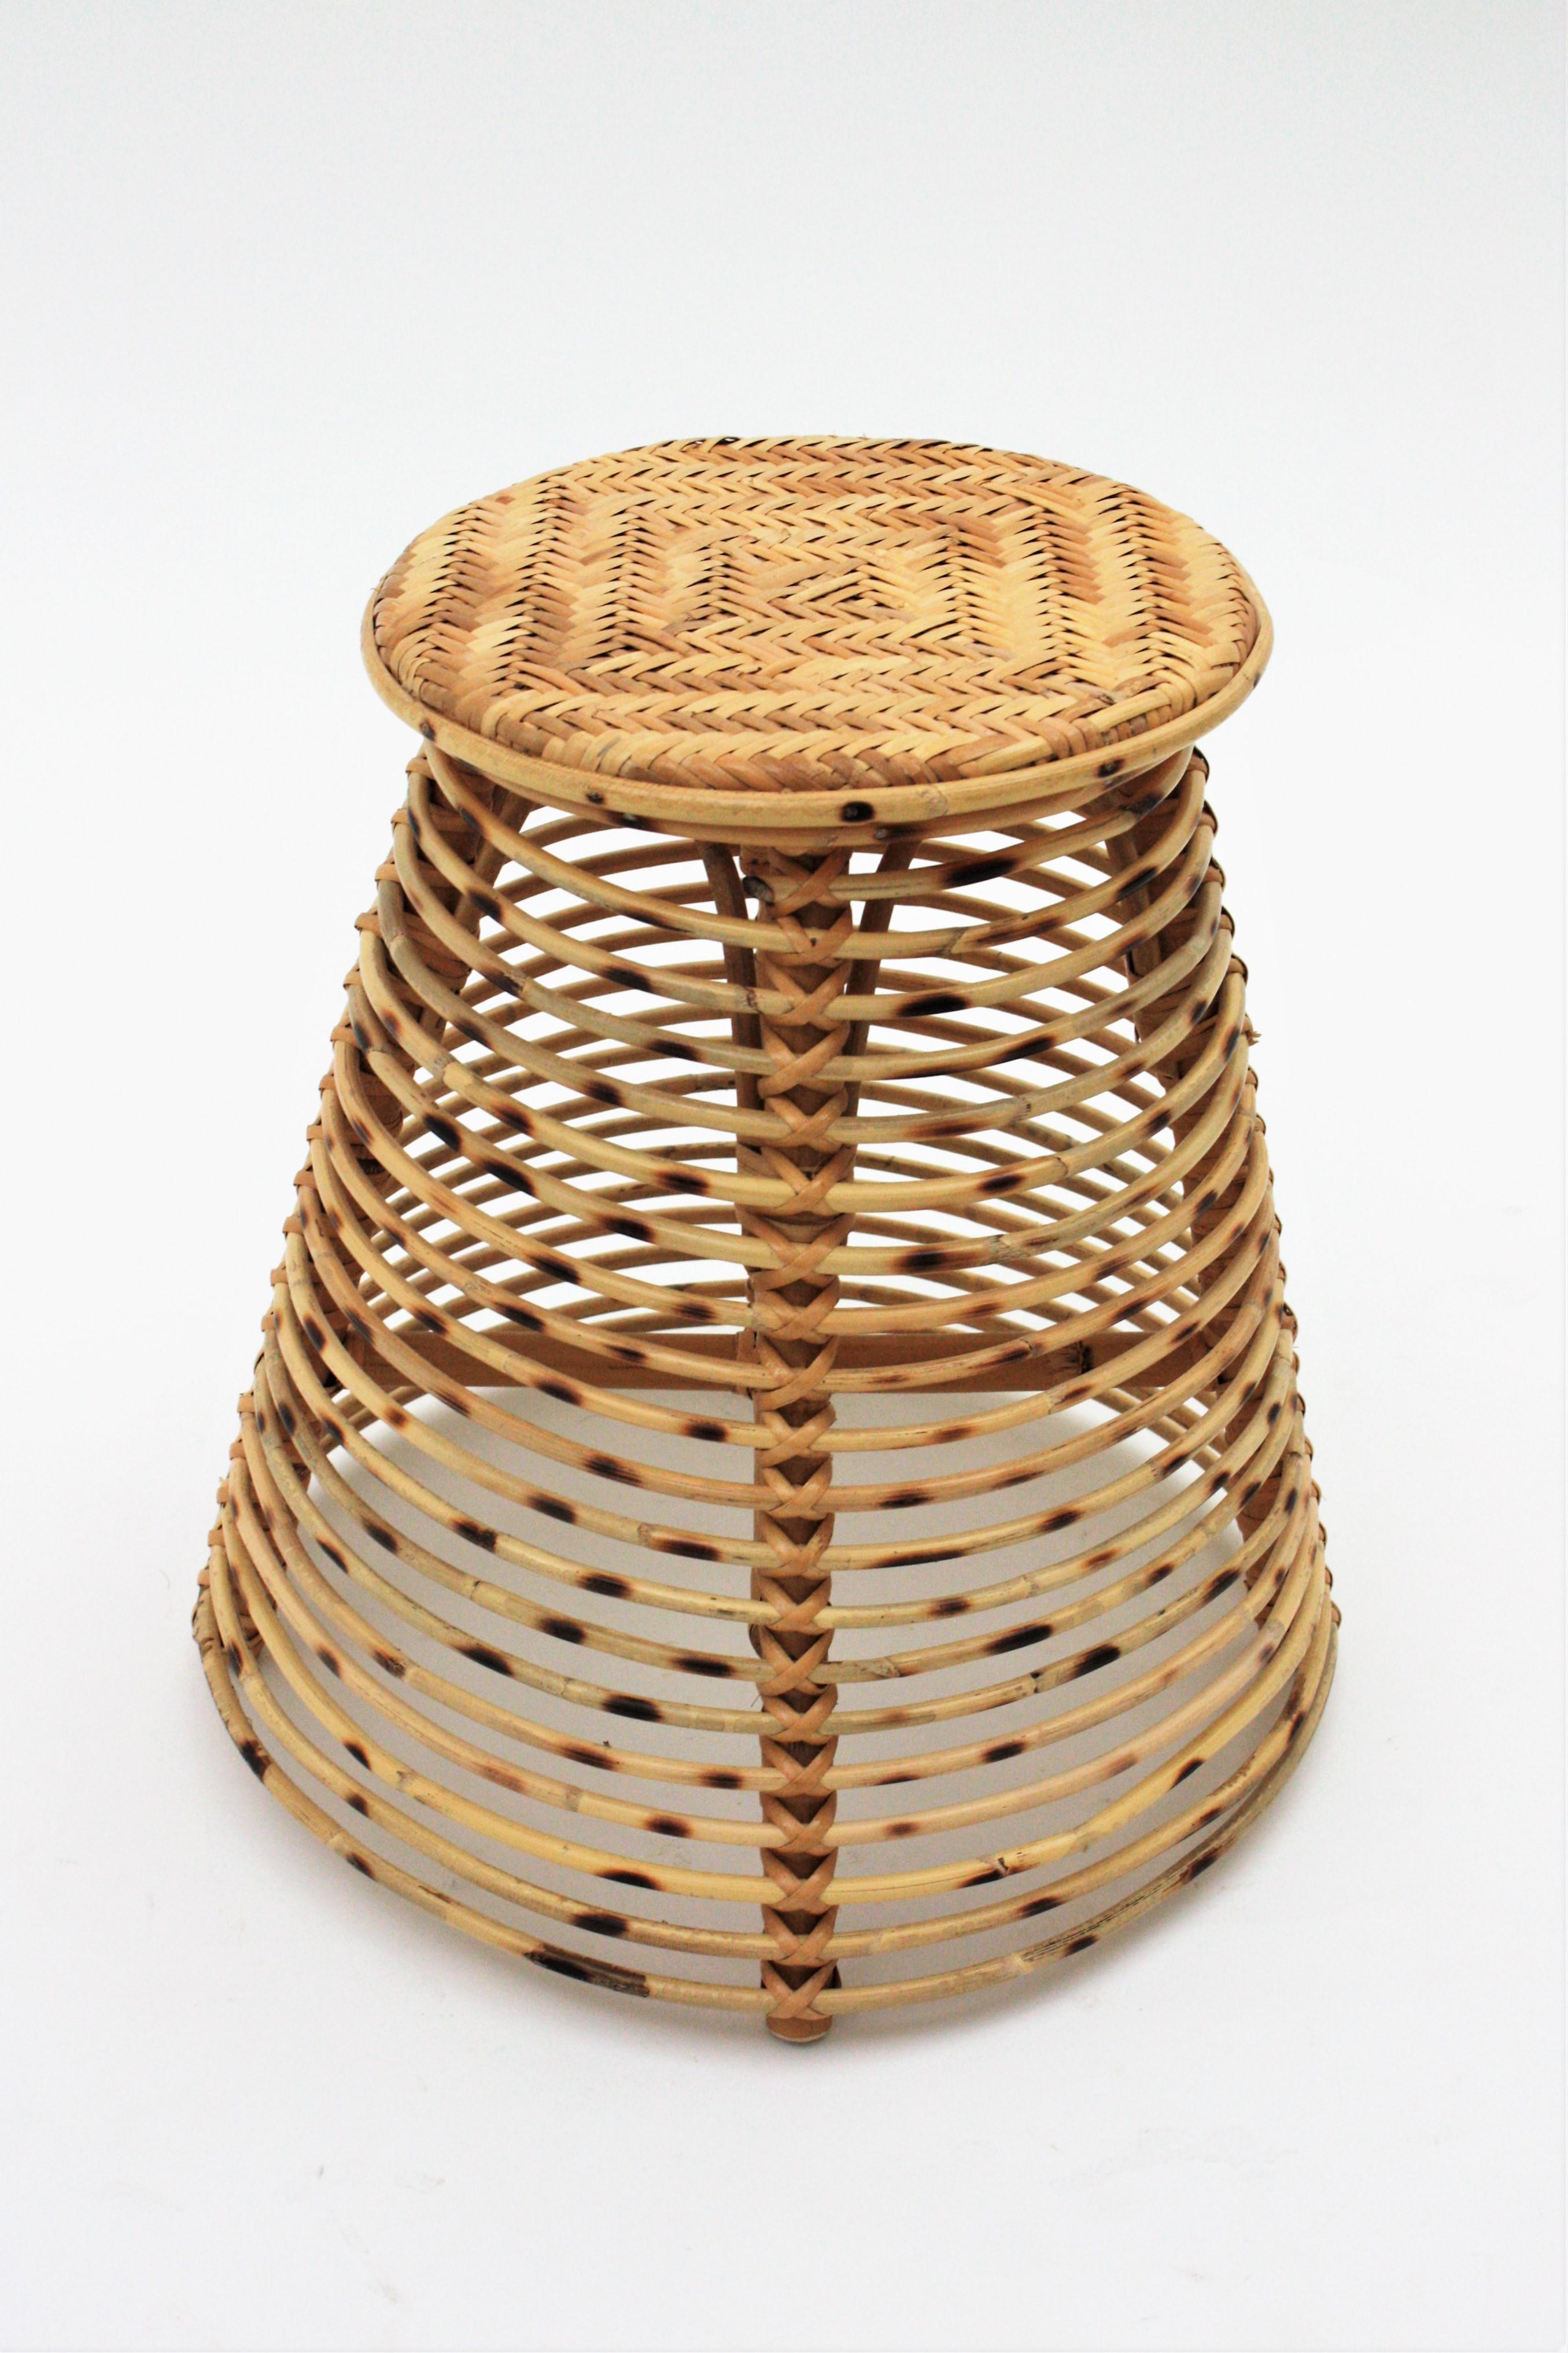 Hand-Crafted Rattan Bamboo Conical Stool or Side Table 